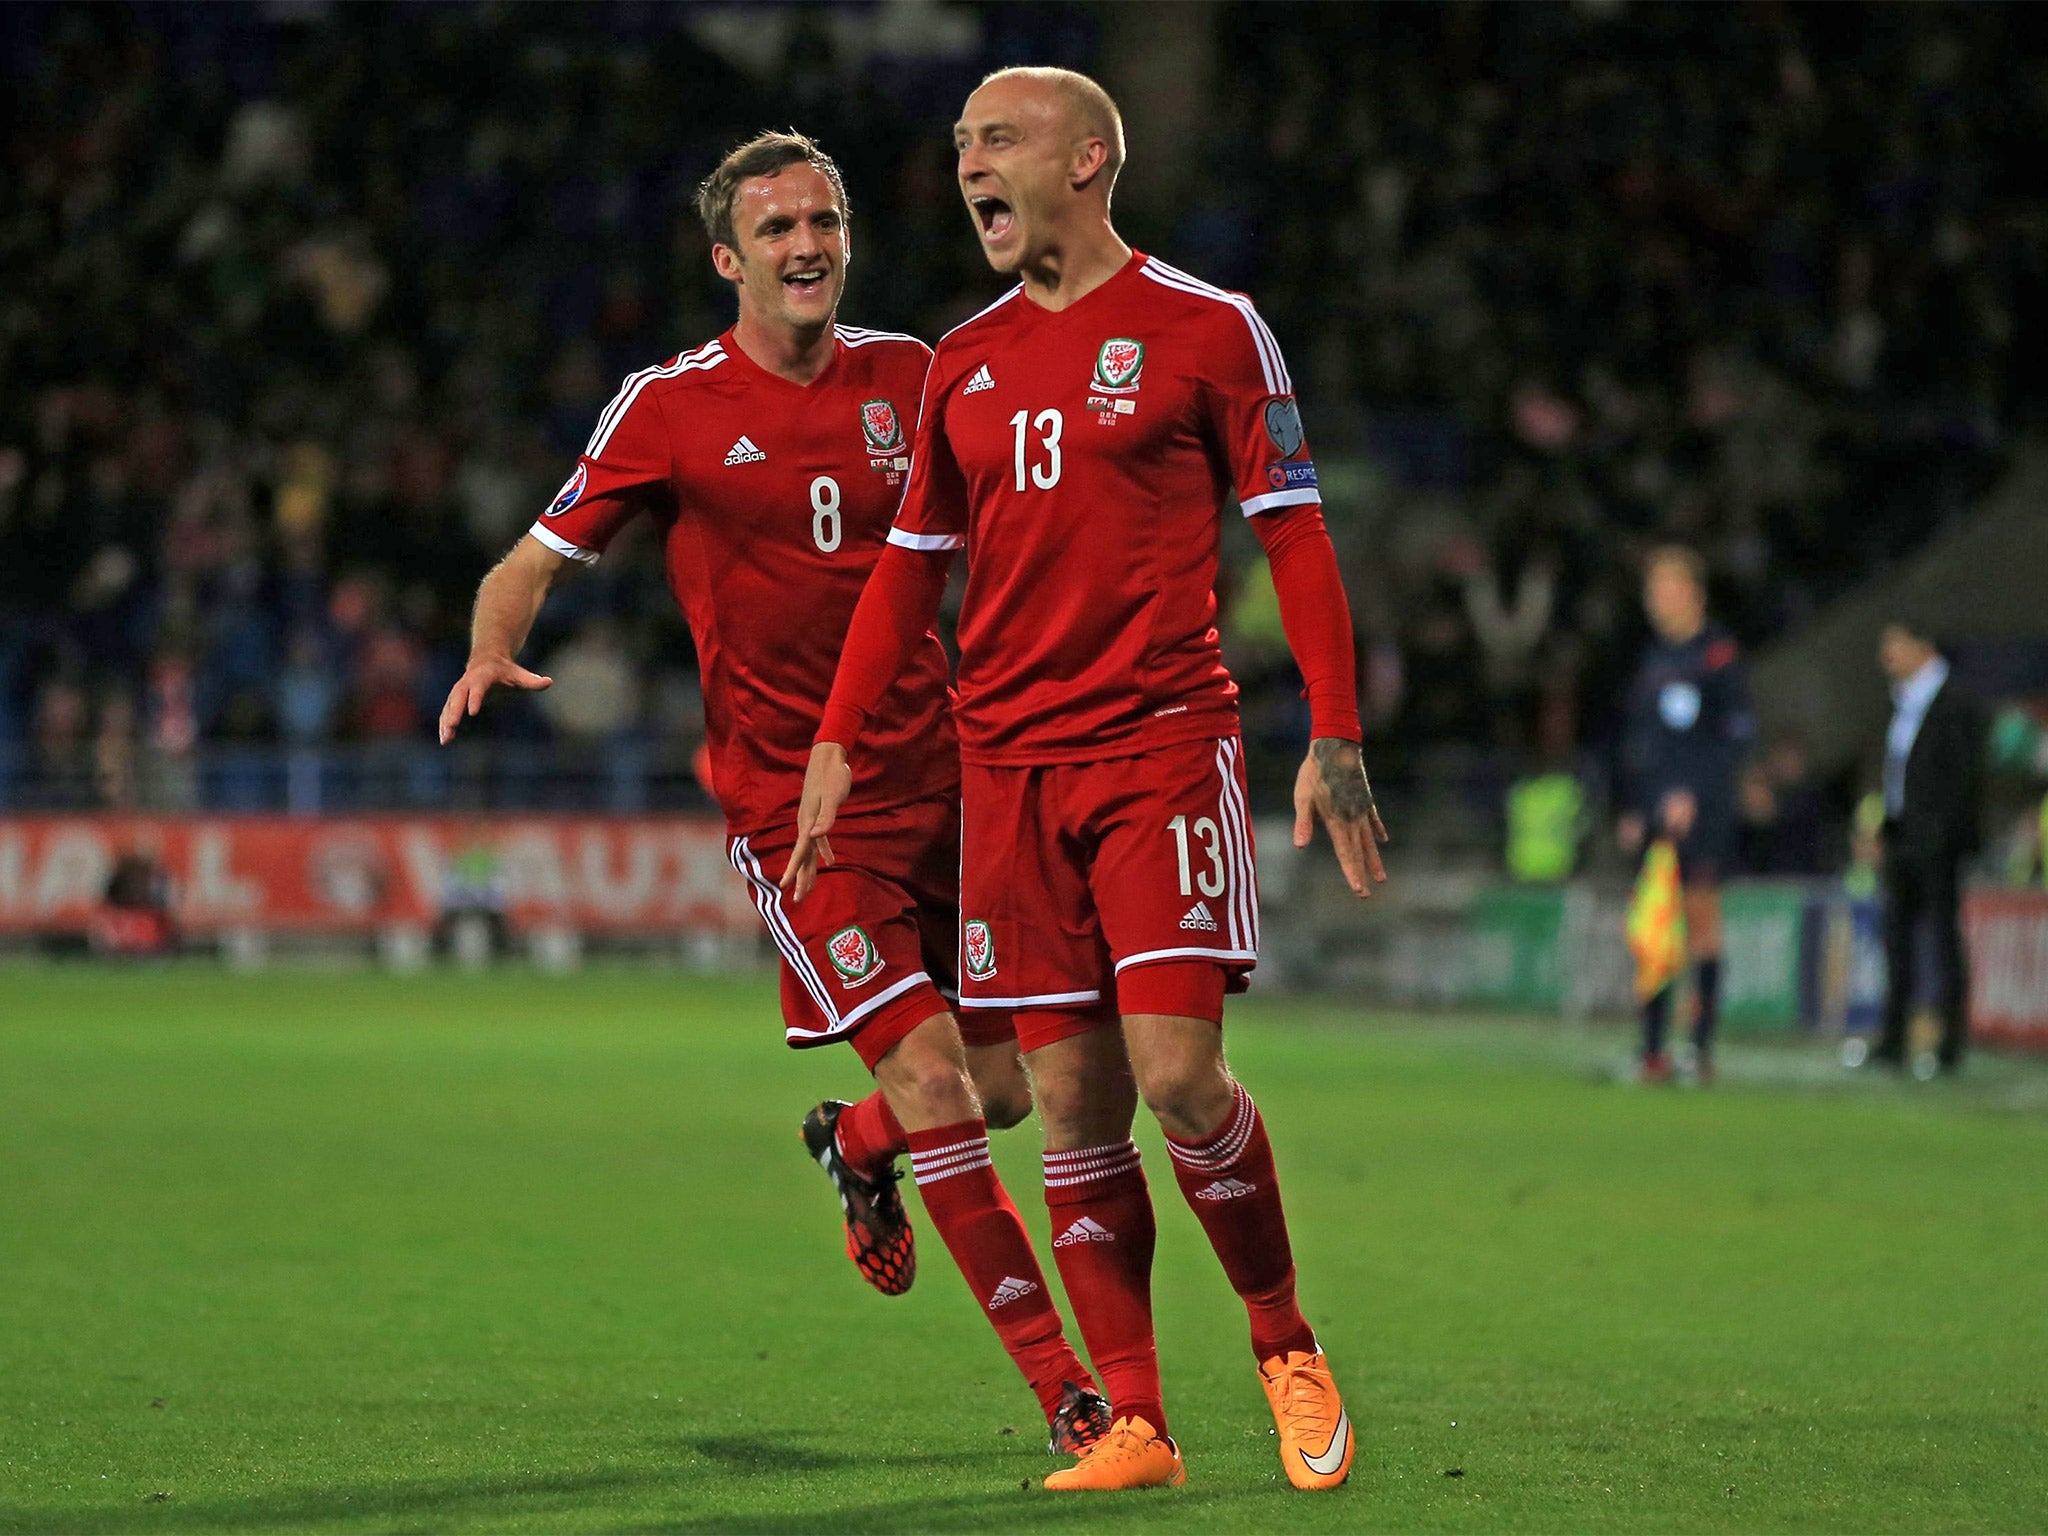 Wales’s David Cotterill scored his country's first against Cyprus